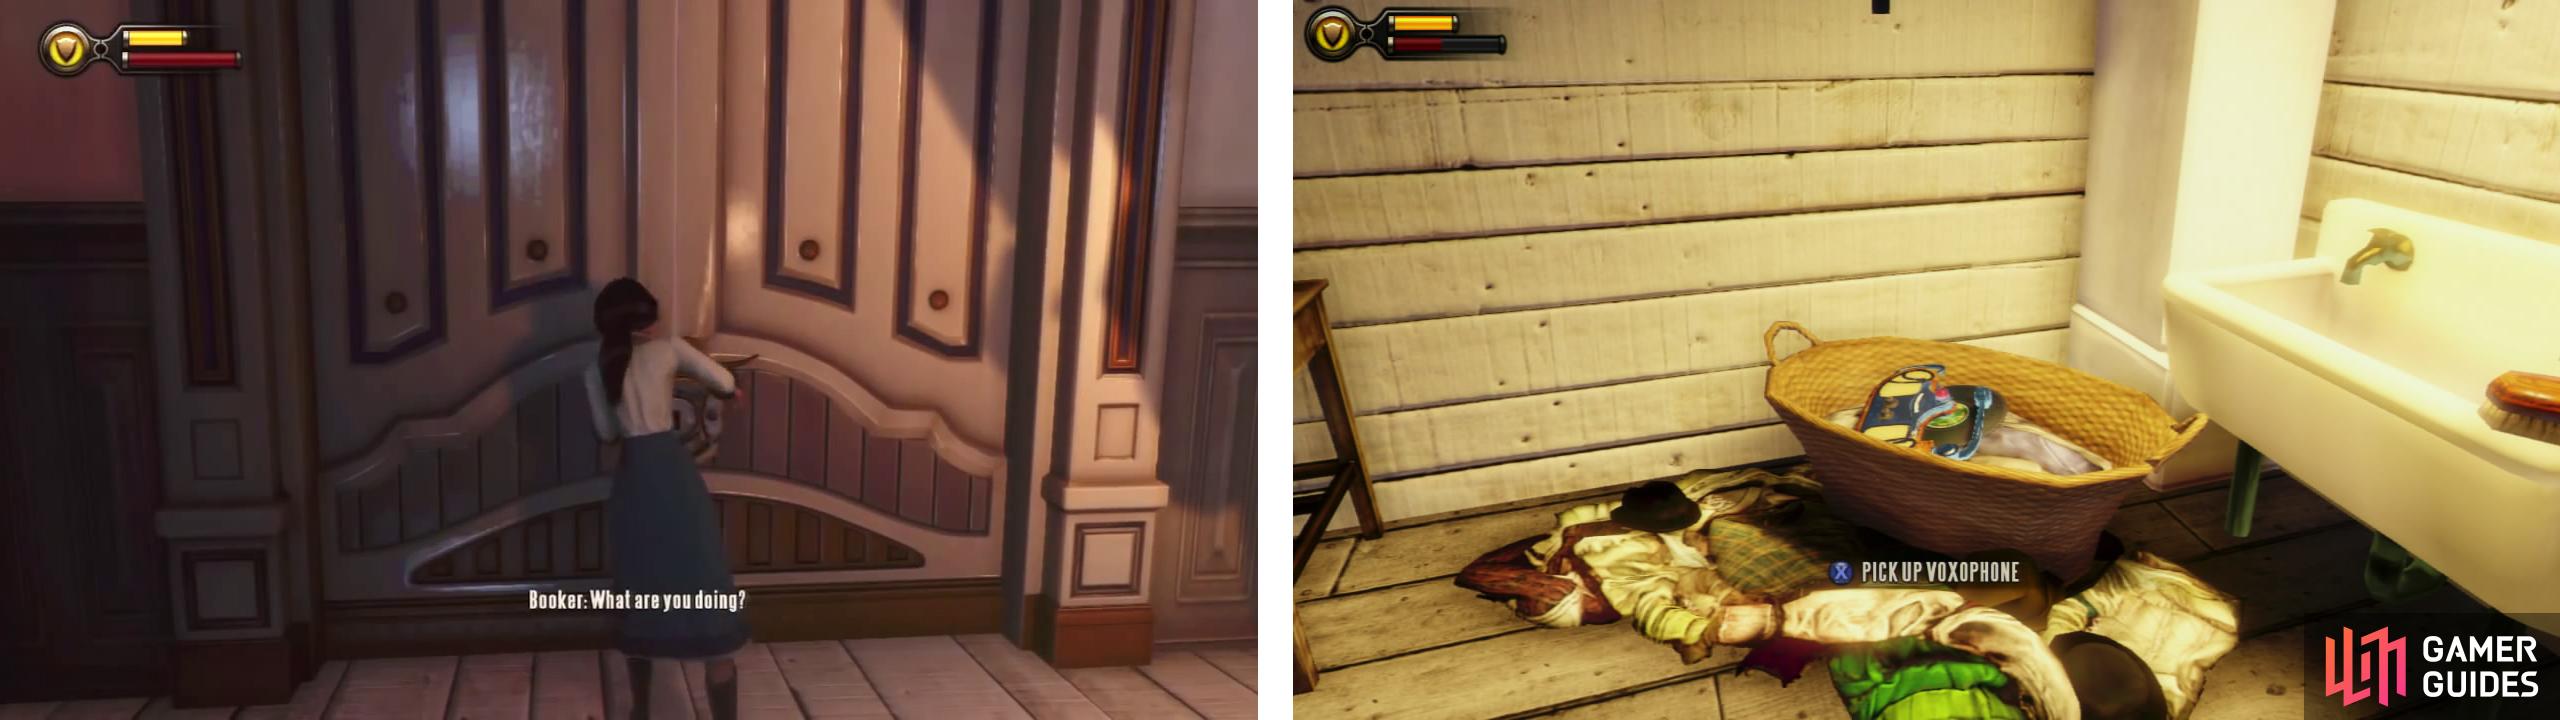 Have Elizabeth pick the lock (left). Go through the door at the end of the hall of a piece of gear and a Voxophone (right).